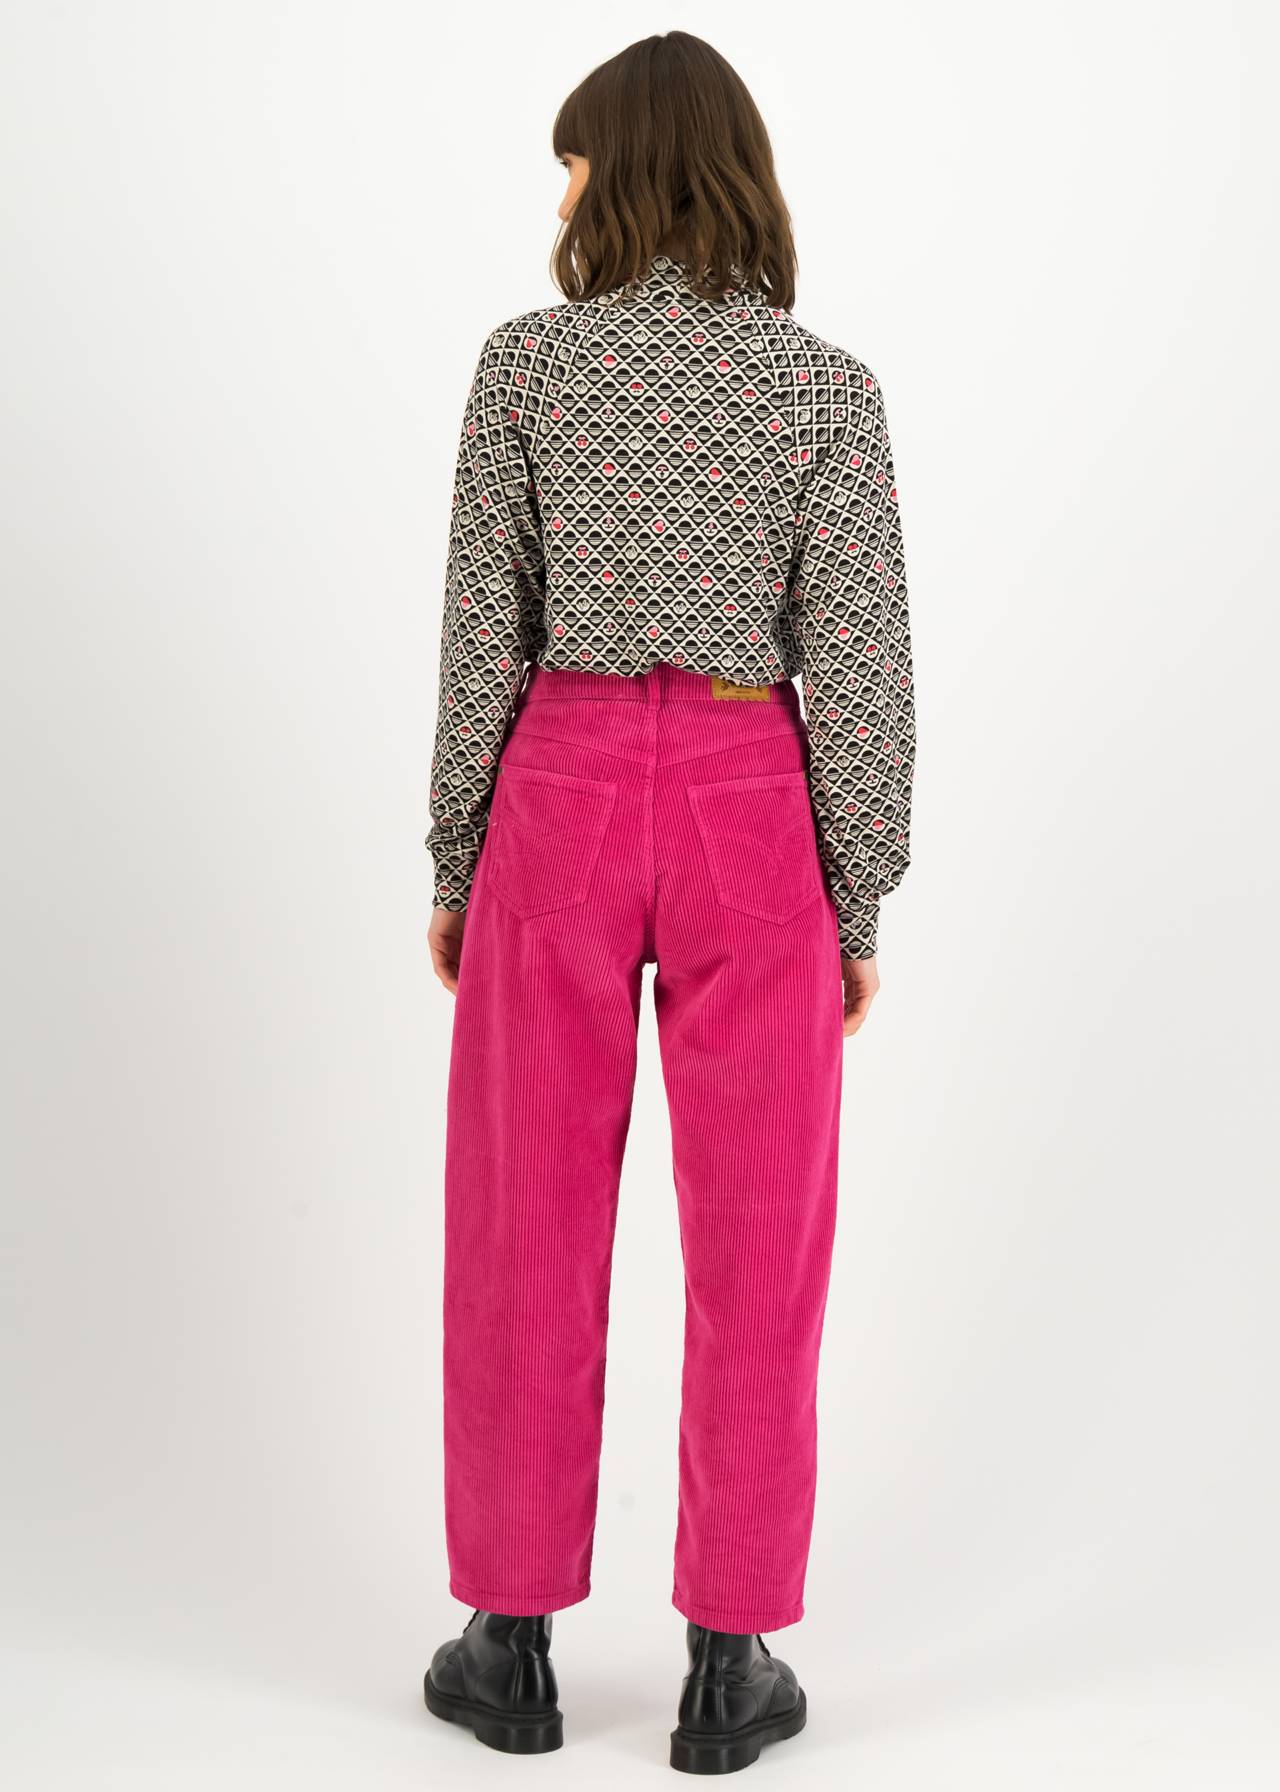 Cordhose High Waist Olotte- kissing booth pink